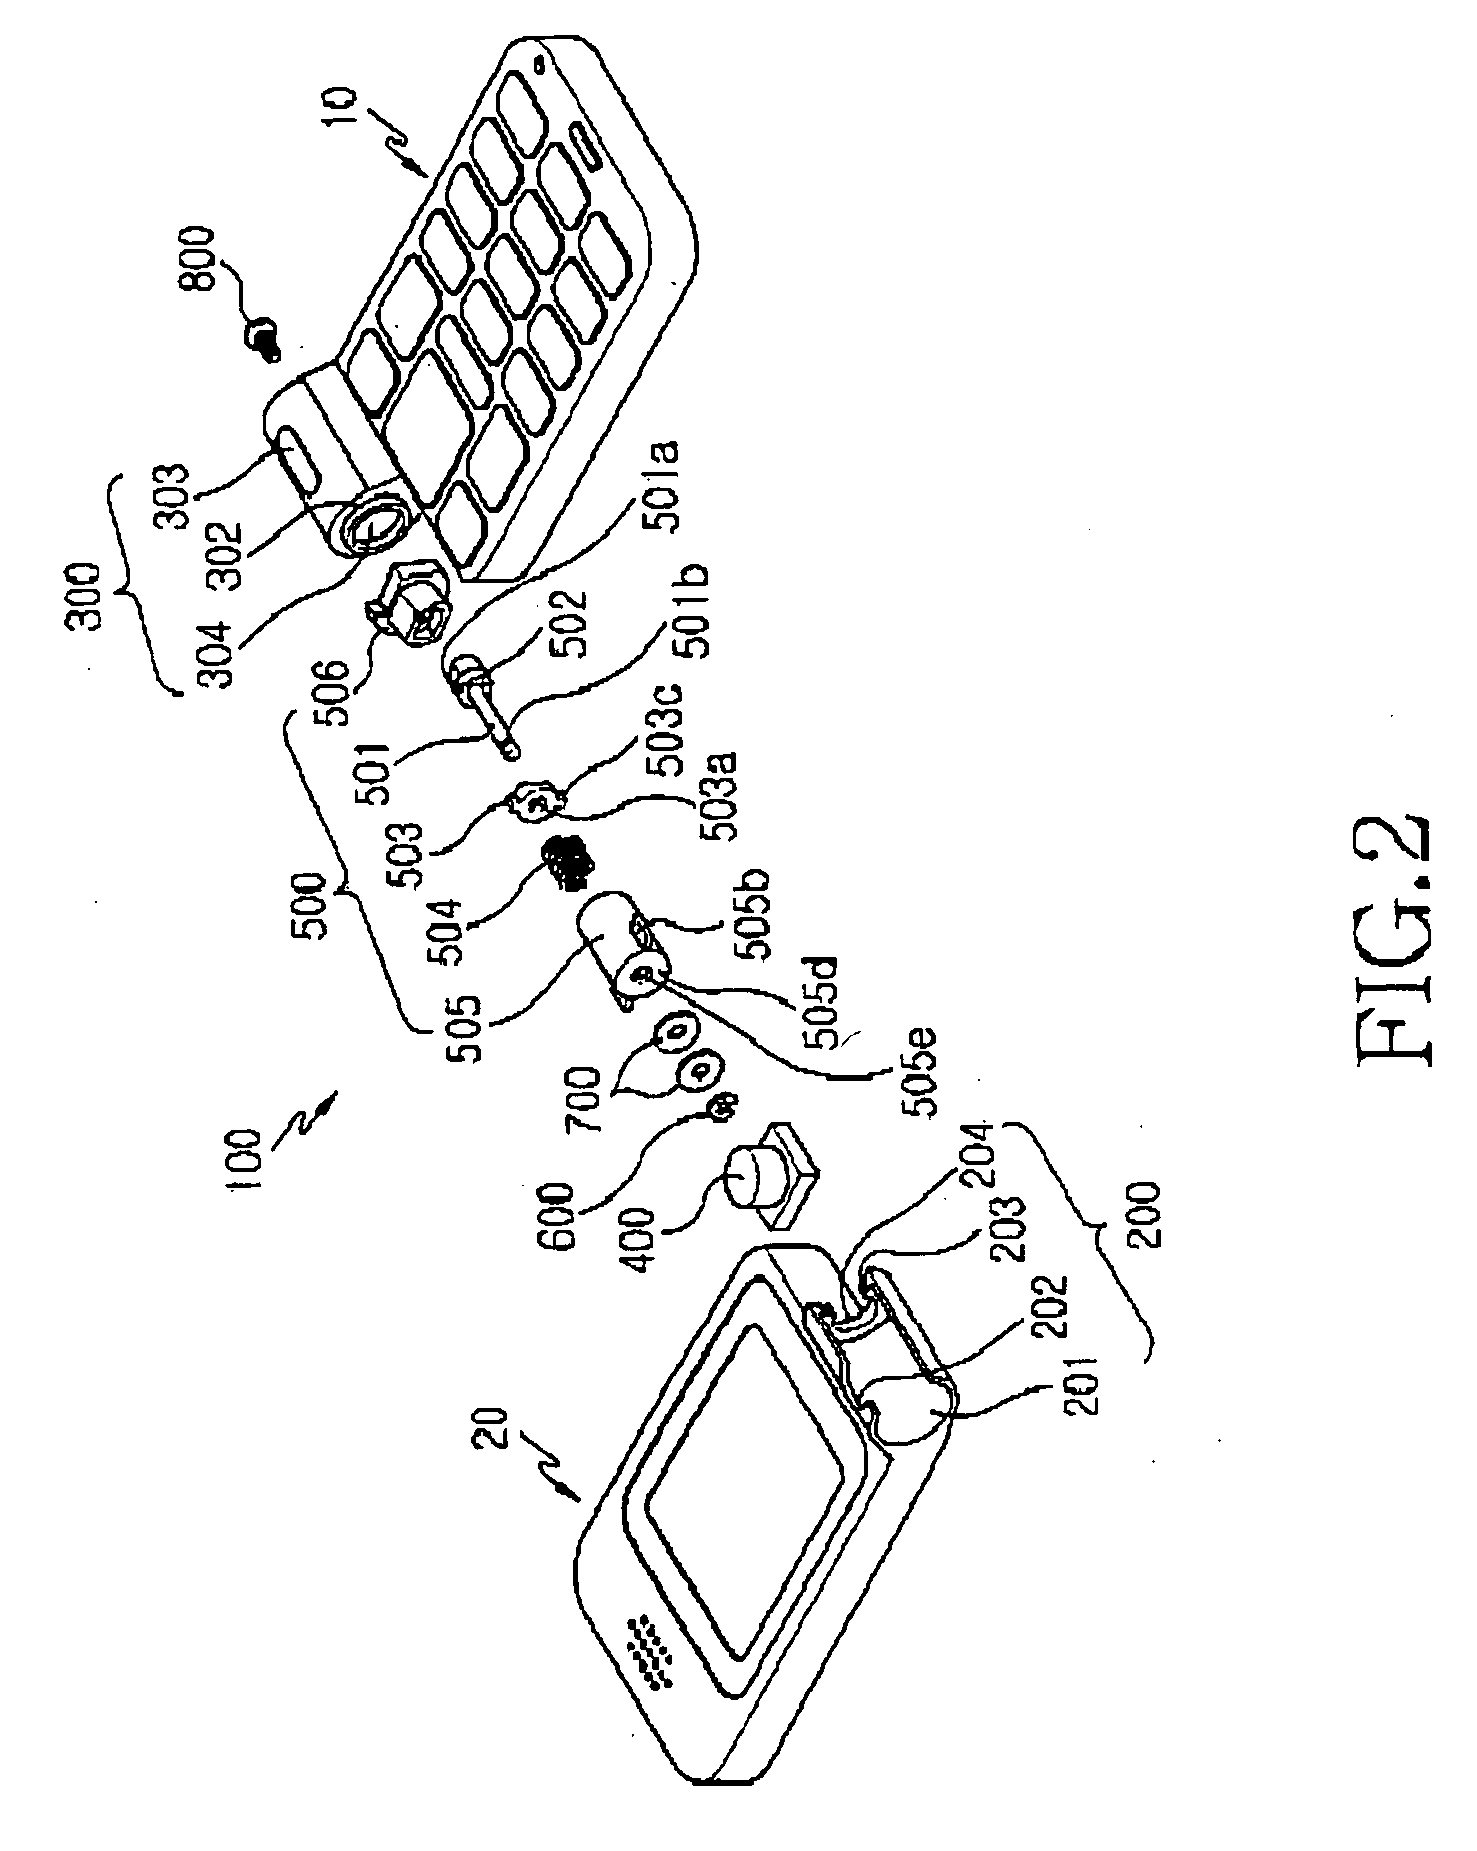 Hinge apparatus for mobile communication terminals